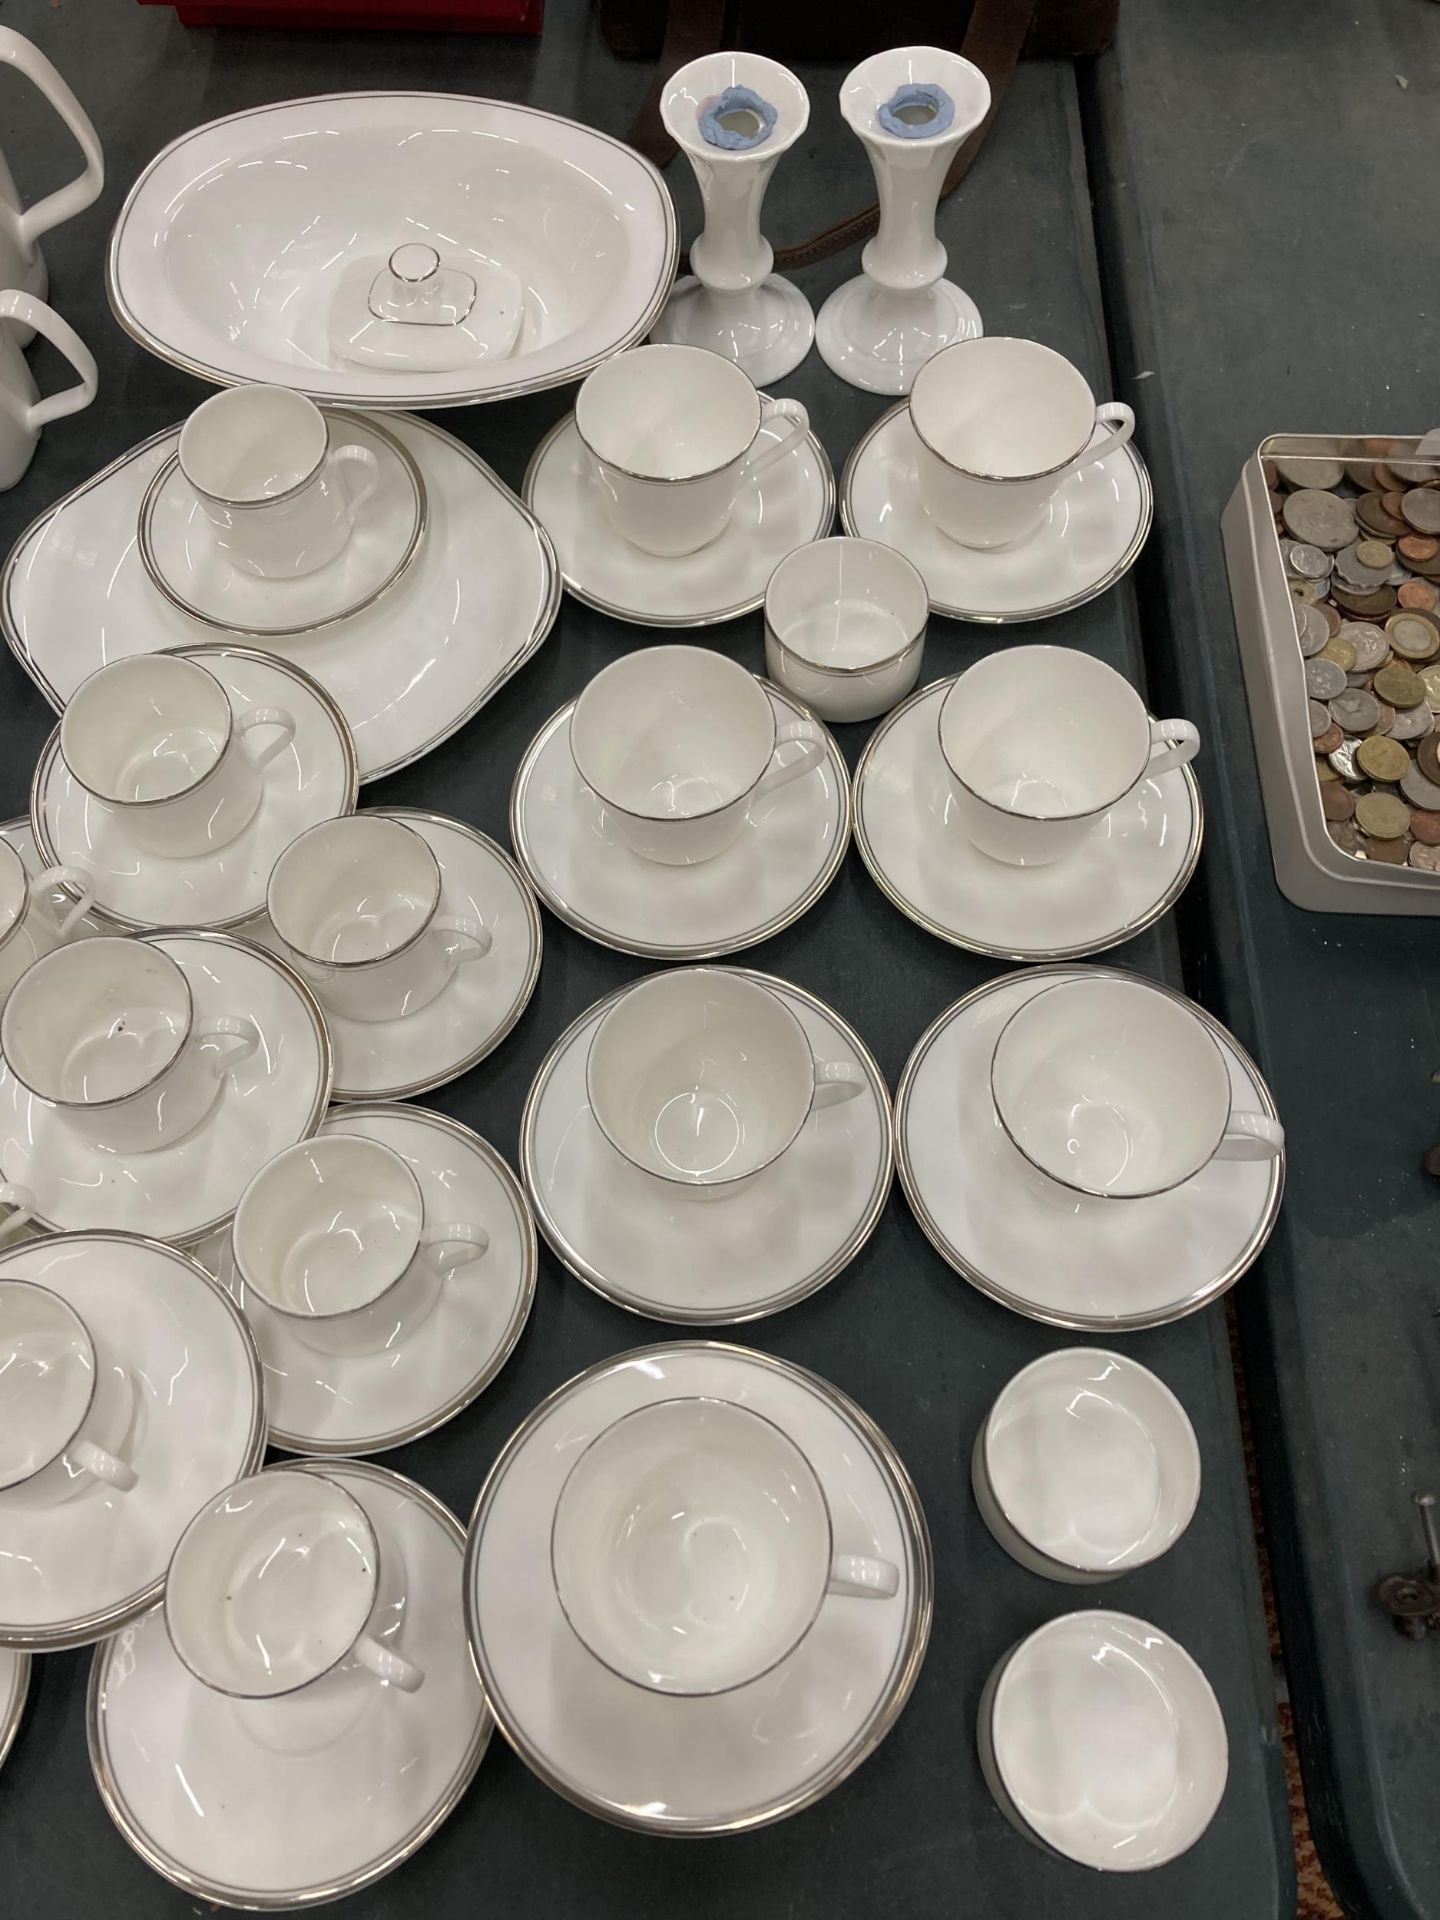 A LARGE ROYAL DOULTON 'PLATINUM CONCORD' PATTERN WHITE BONE CHINA DINNER SERVICE - Image 2 of 5